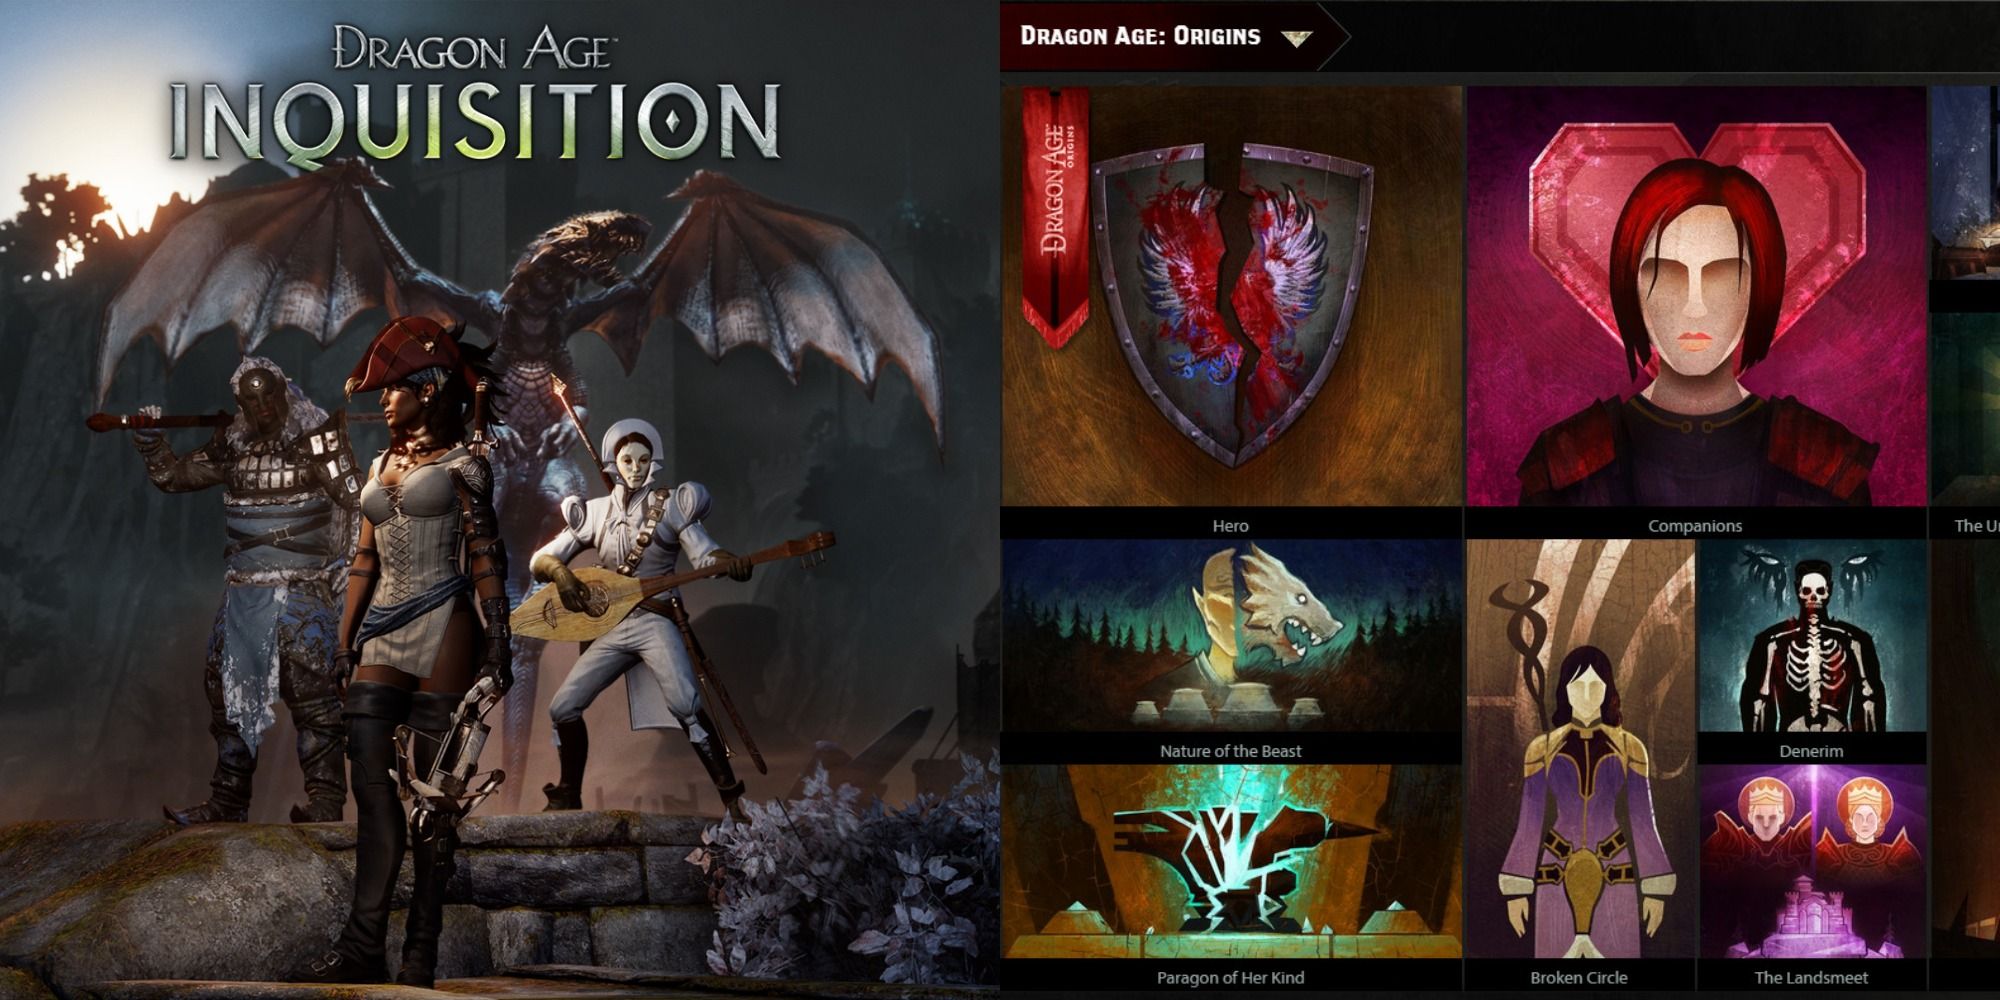 Can I play Dragon Age Inquisition before Origins?